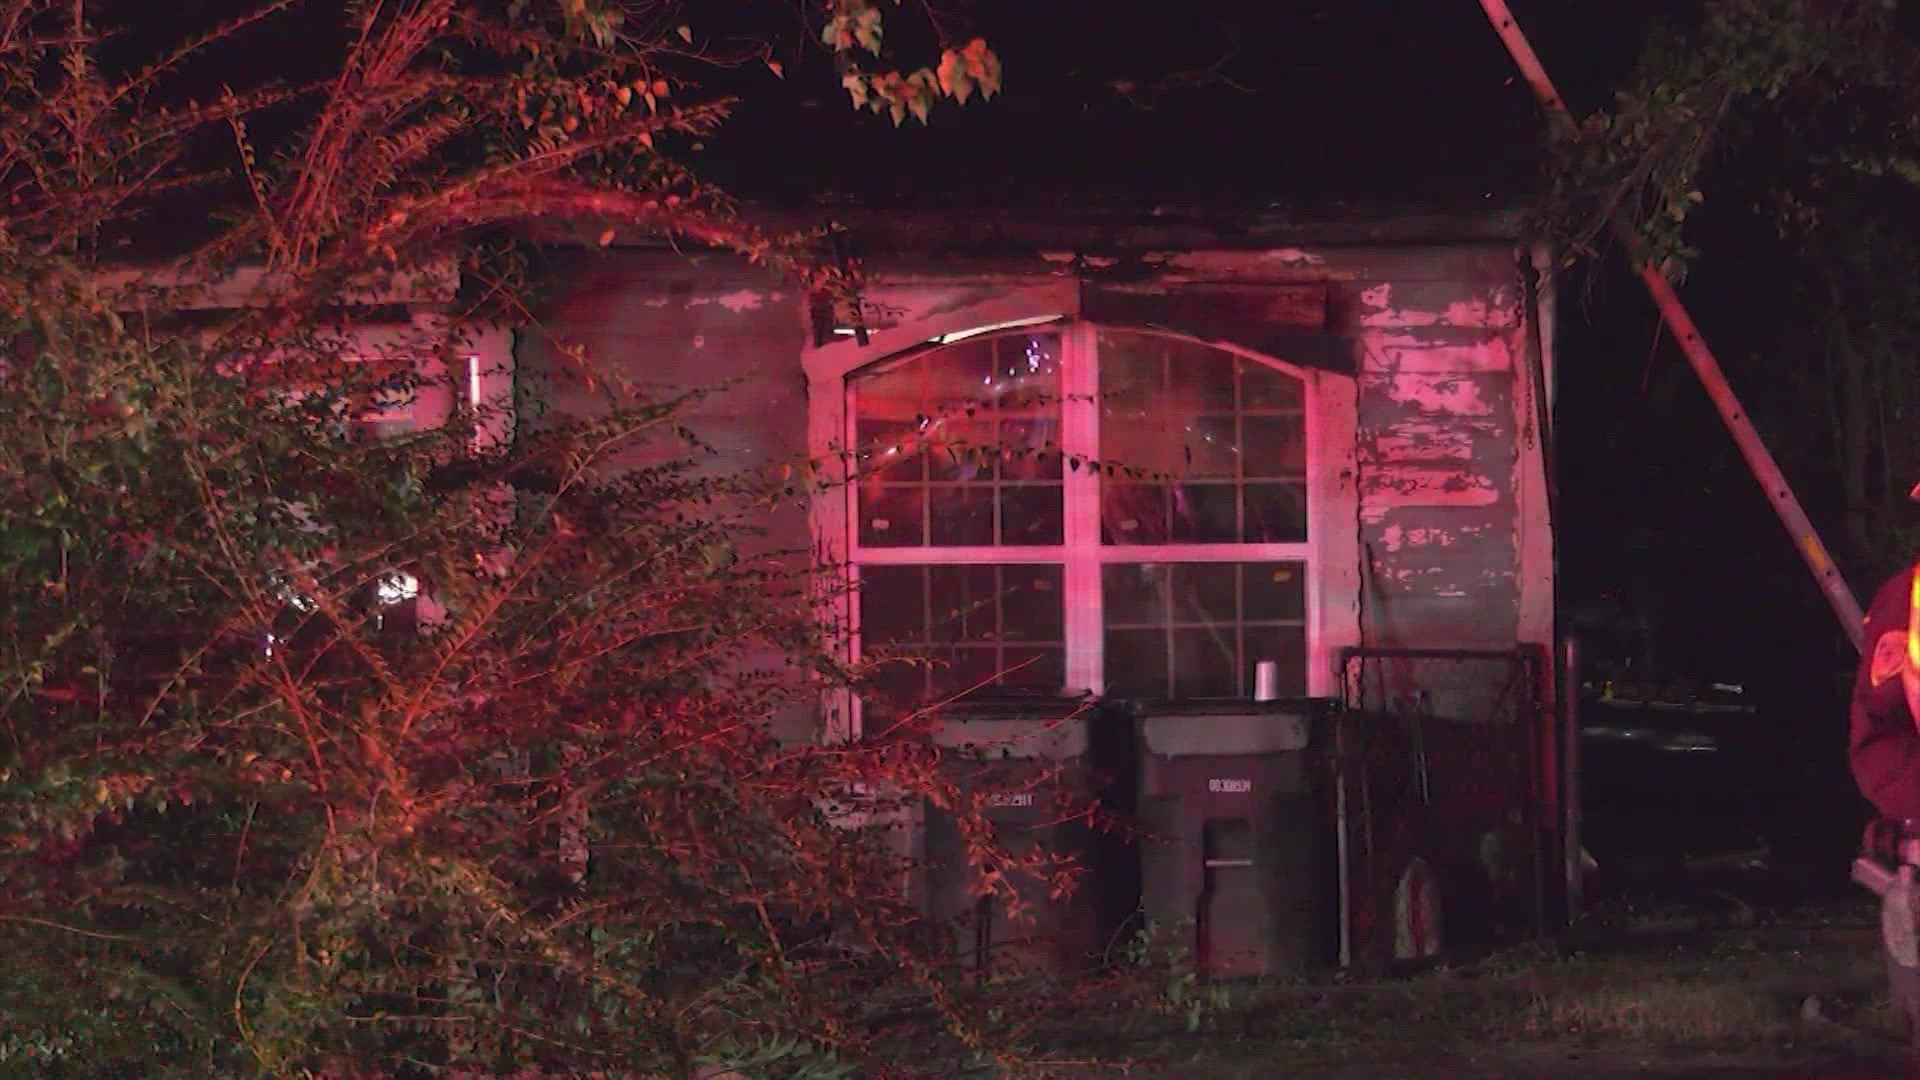 A man was found dead following a house fire in southwest Houston Wednesday night, according to the Houston Fire Department.